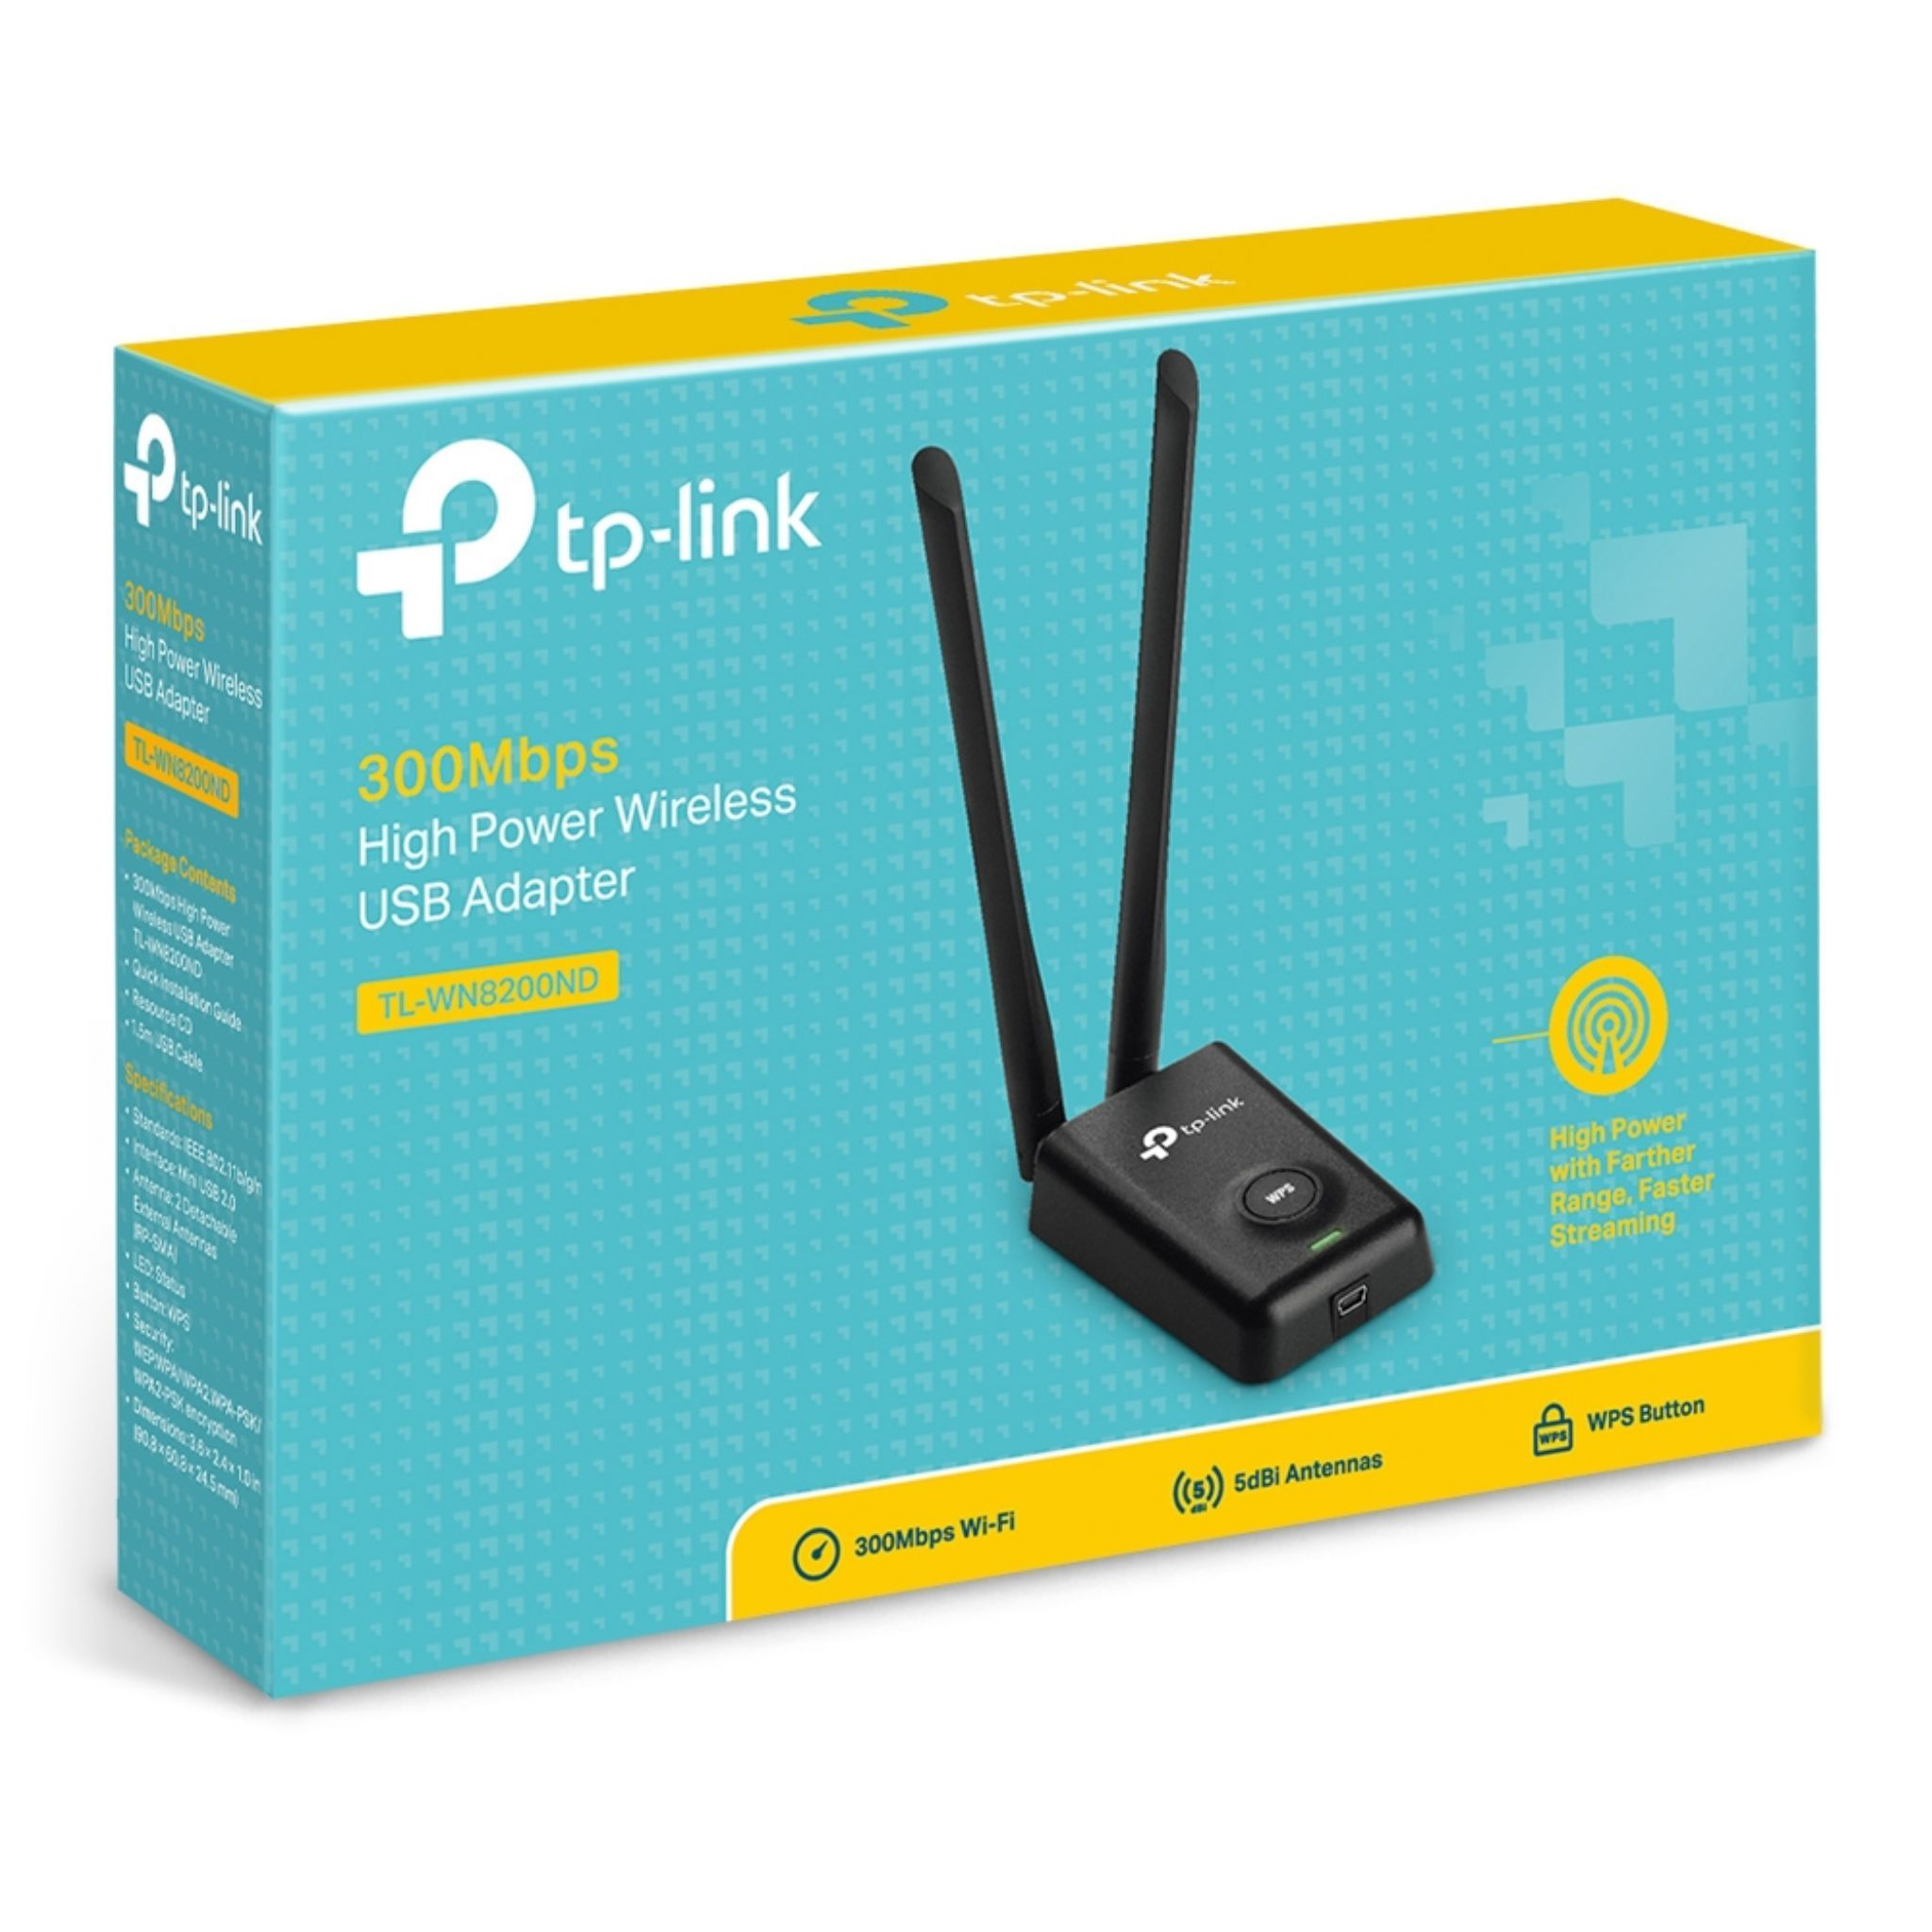 Netzadapter TL-WN8200ND Mbit/s TP-LINK 300